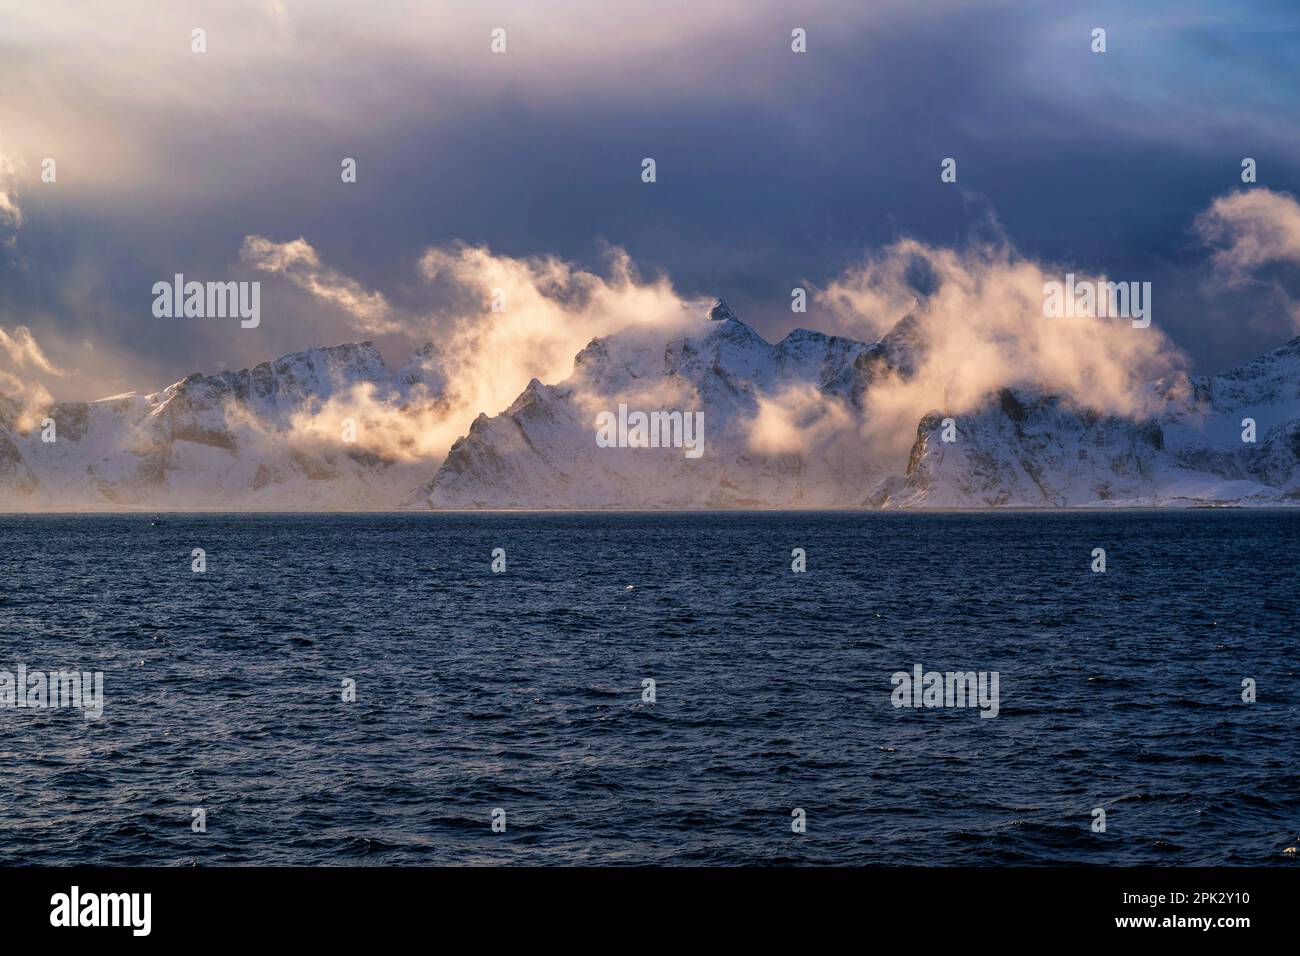 Gorgeous view to snowy rocky mountain on dramatic background of cloudy sky illumination by setting sun from boat. Lofoten, Norway. Stock Photo